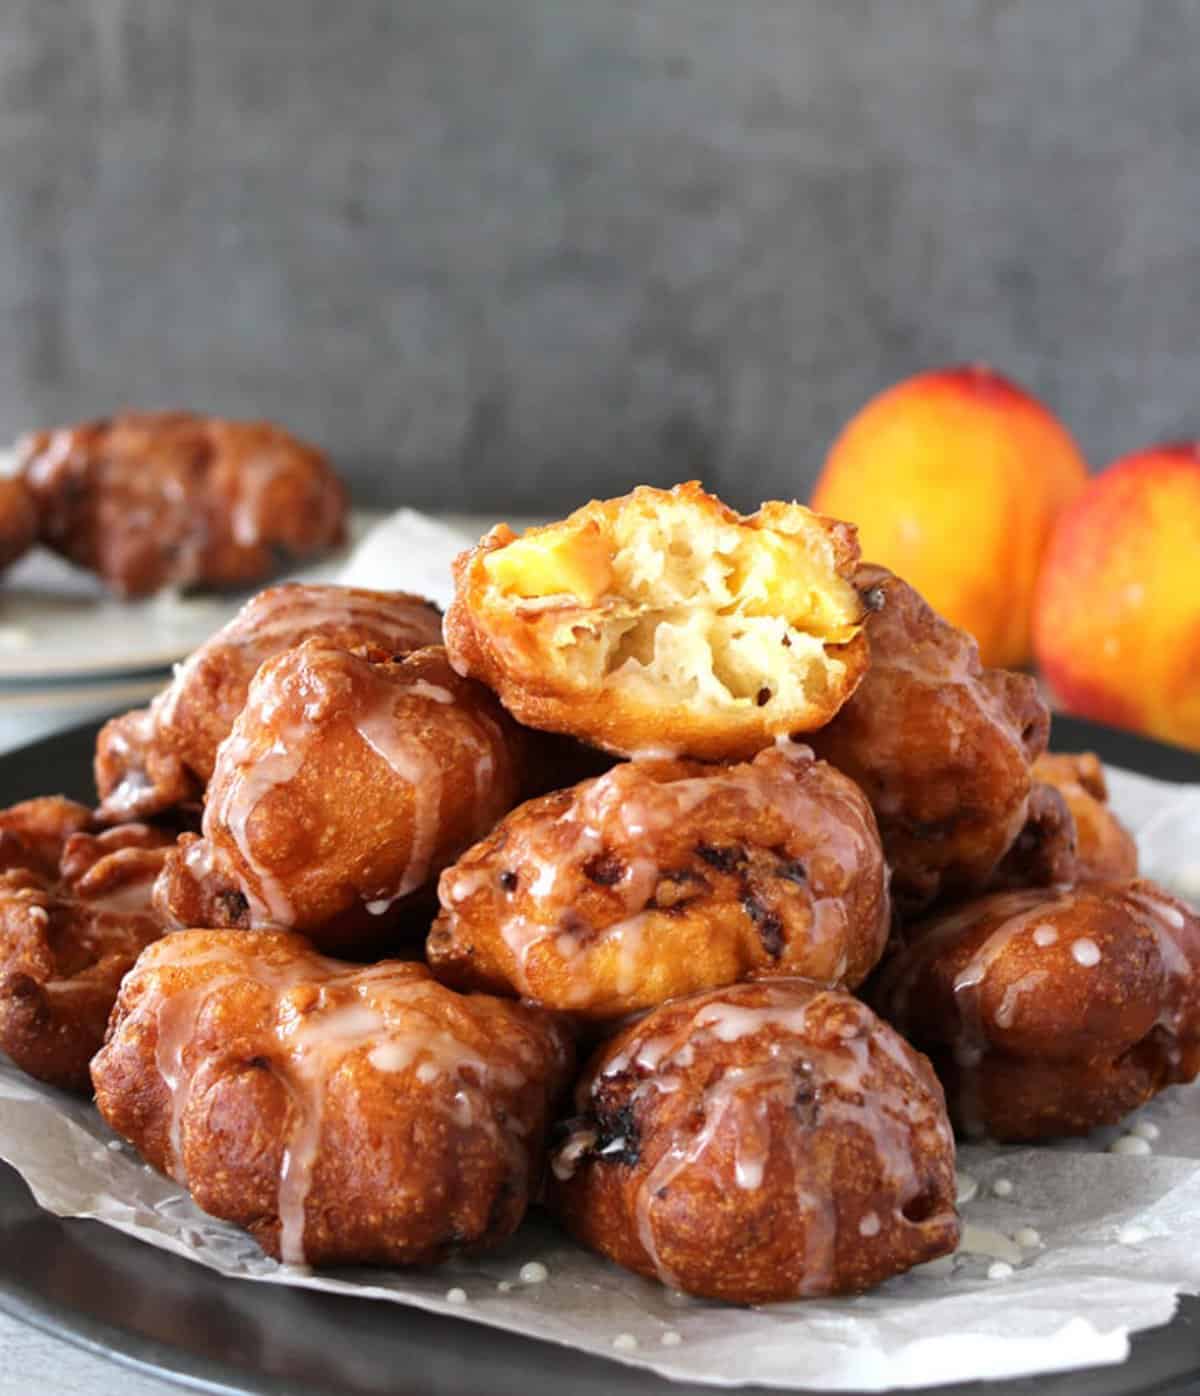 Quick and easy peach fritters served on a black plate. The fritter on top is opened to show the delicate and fluffy interior.